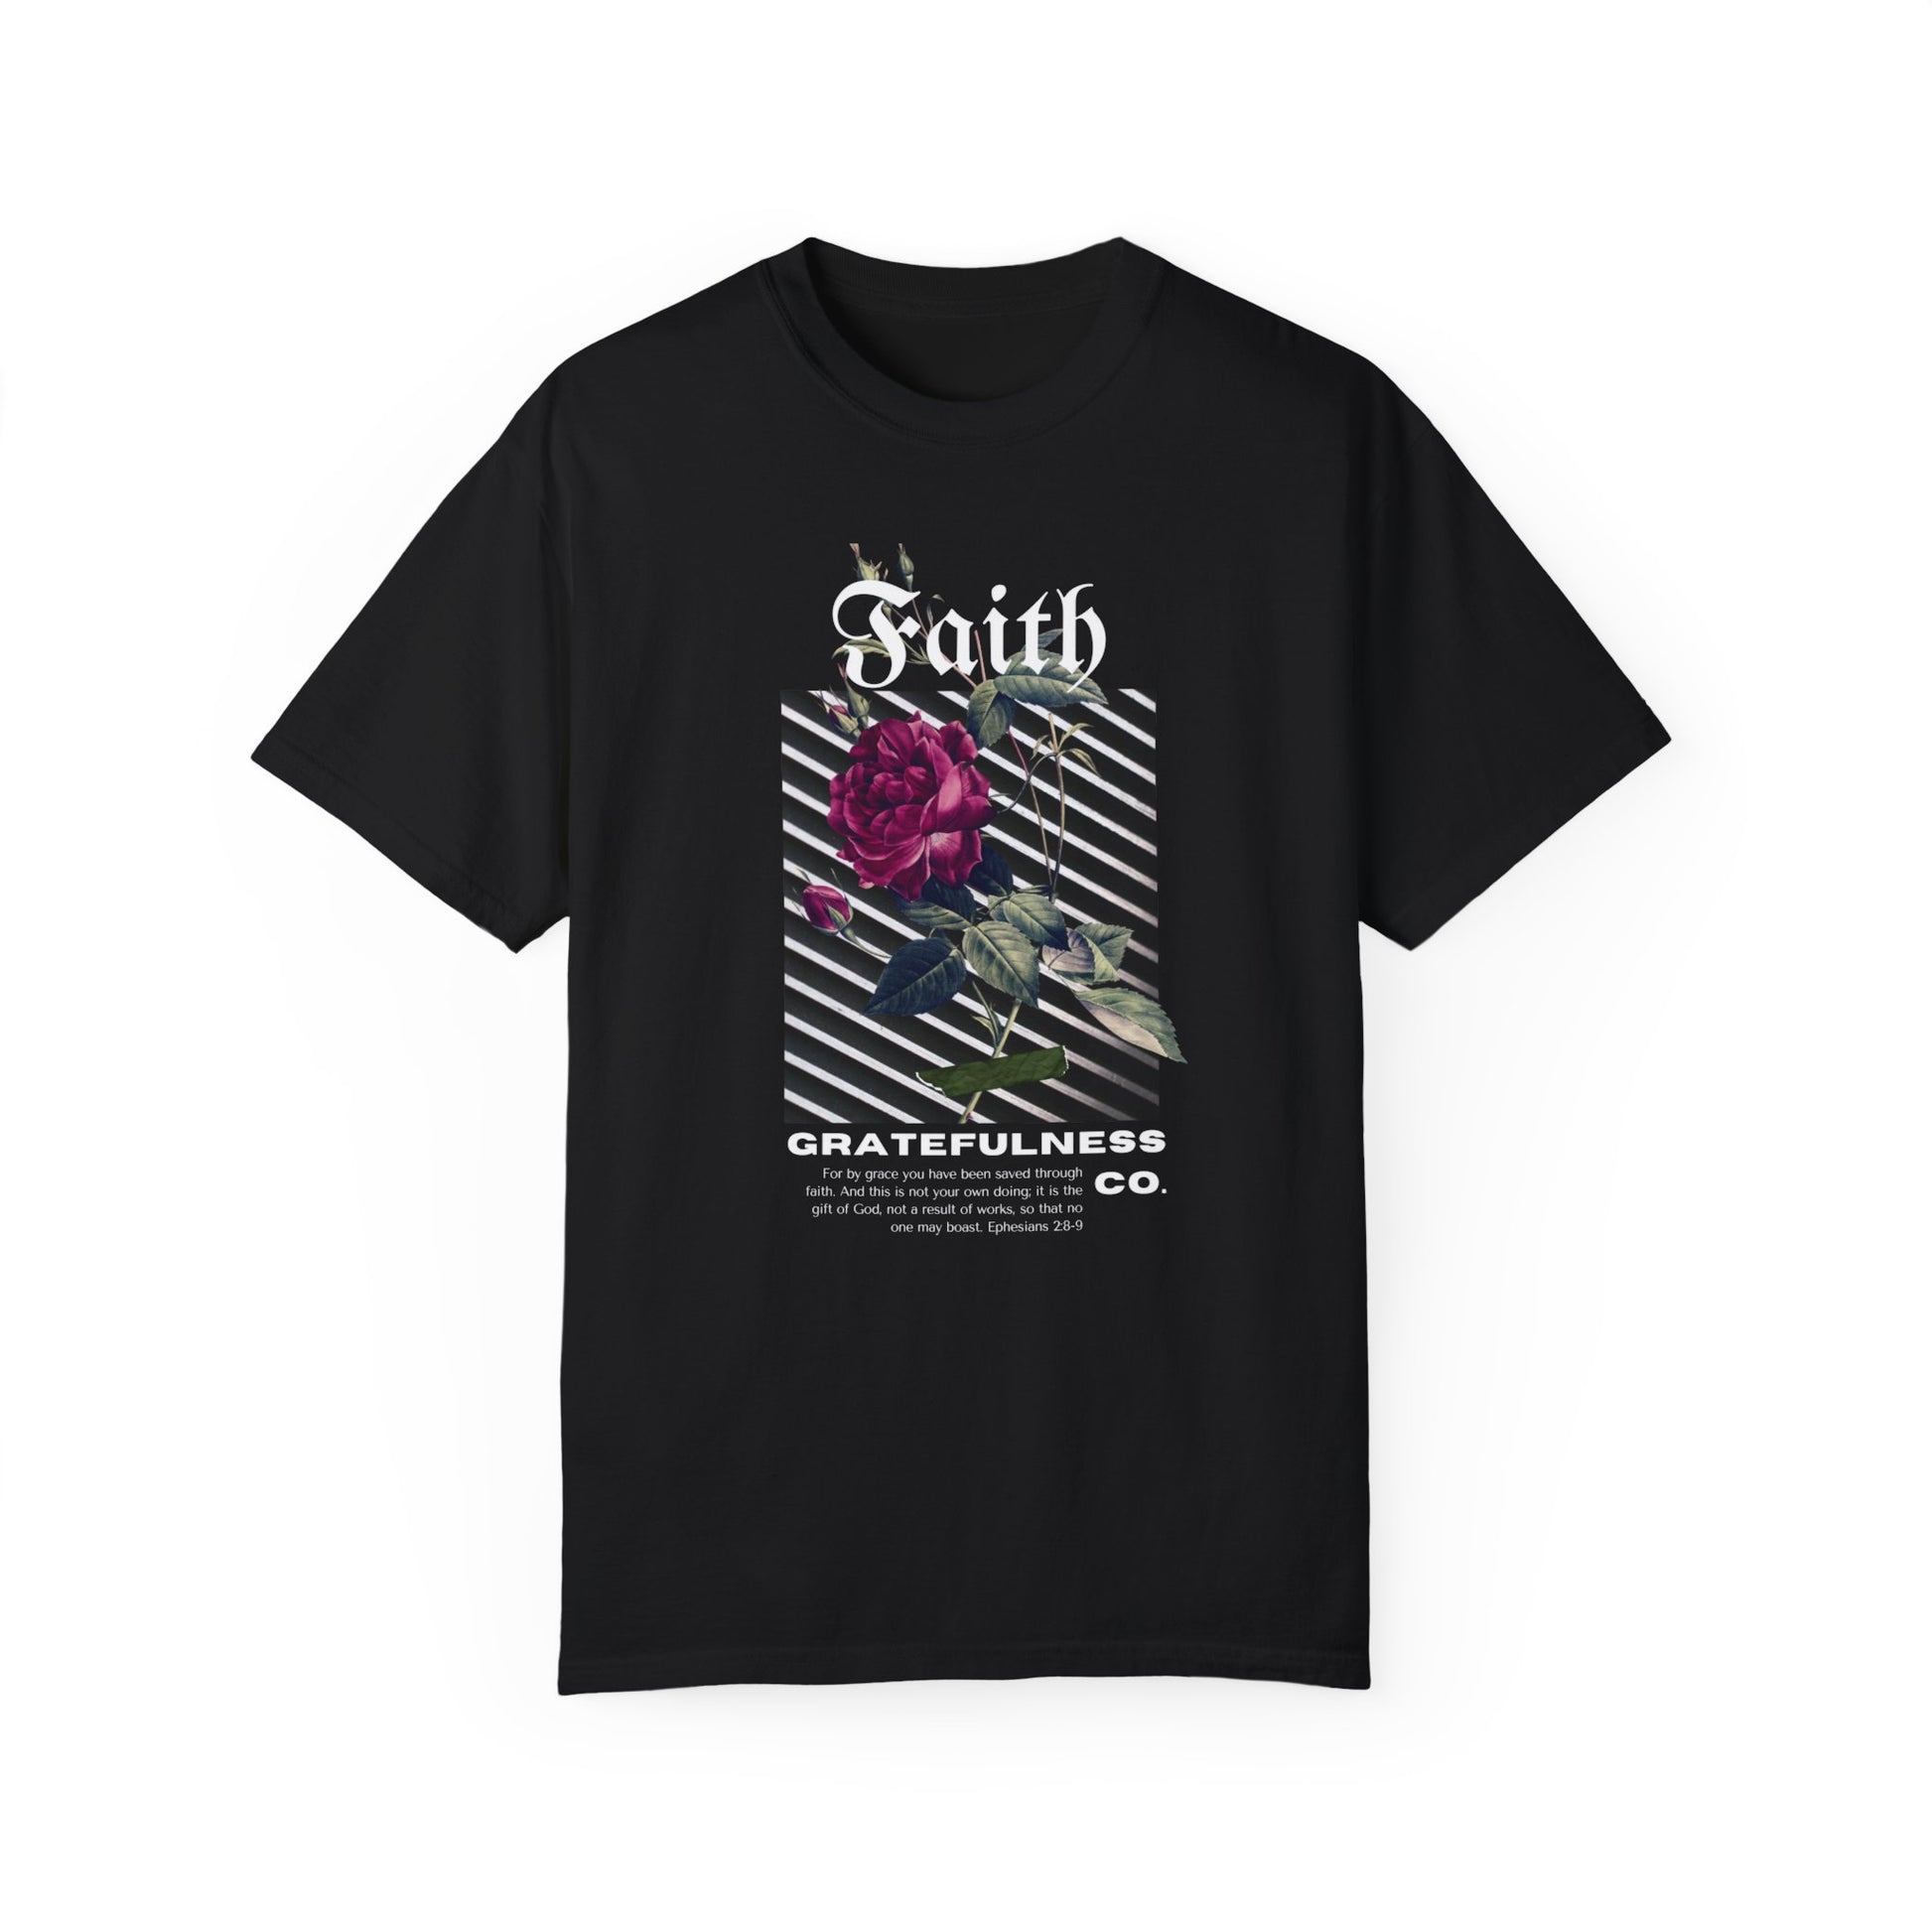 Walking By Faith Classic Tee – A Meaningful Mood